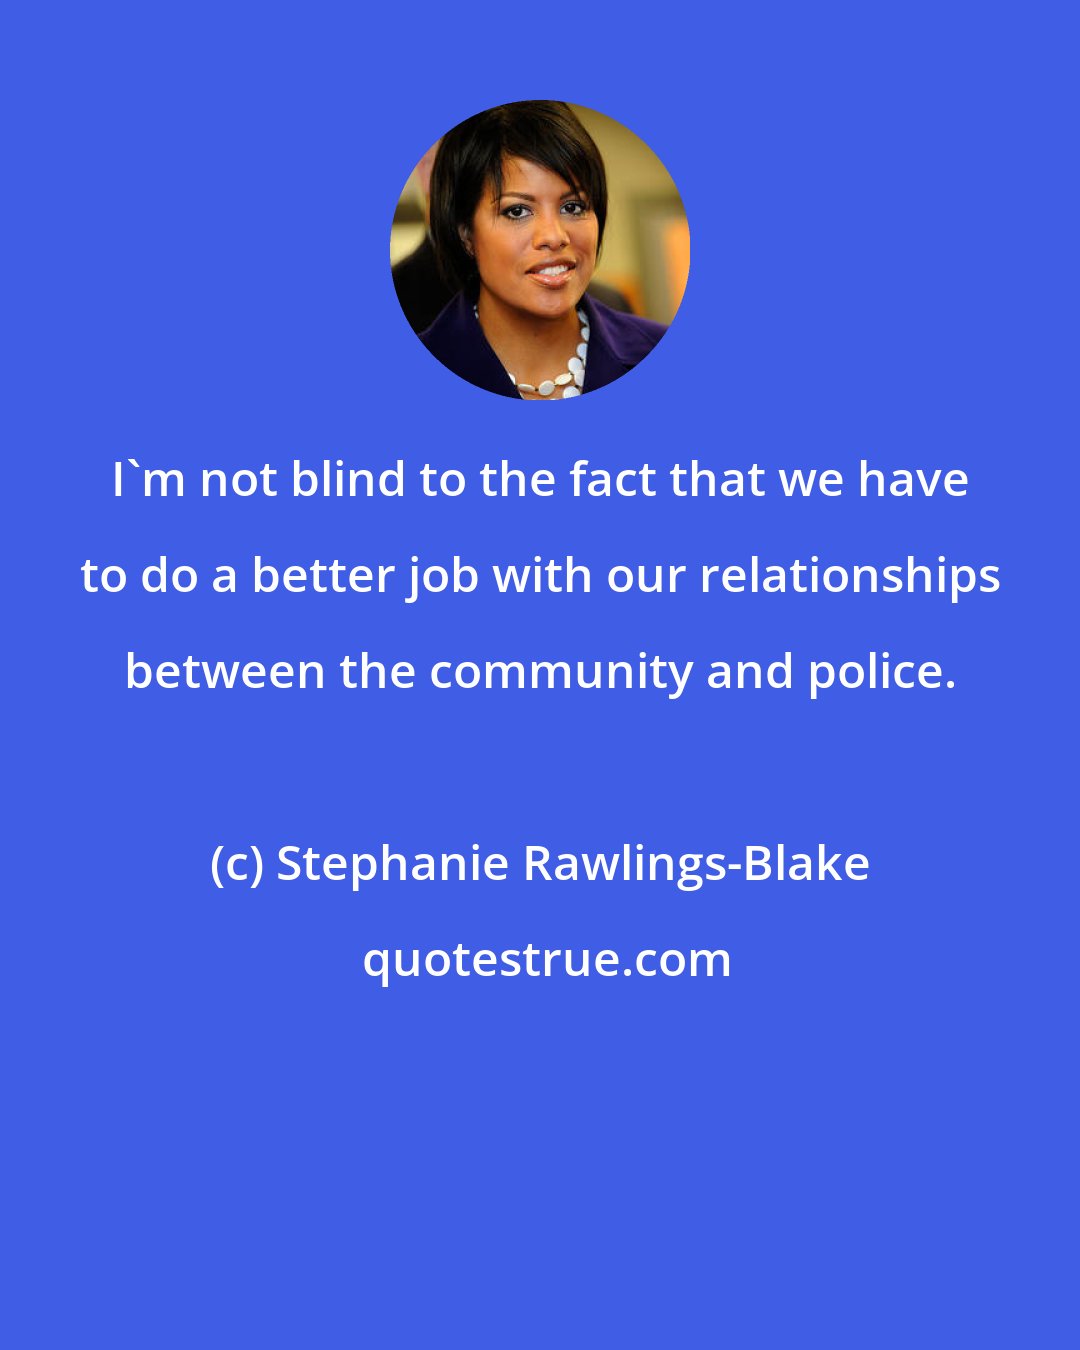 Stephanie Rawlings-Blake: I'm not blind to the fact that we have to do a better job with our relationships between the community and police.